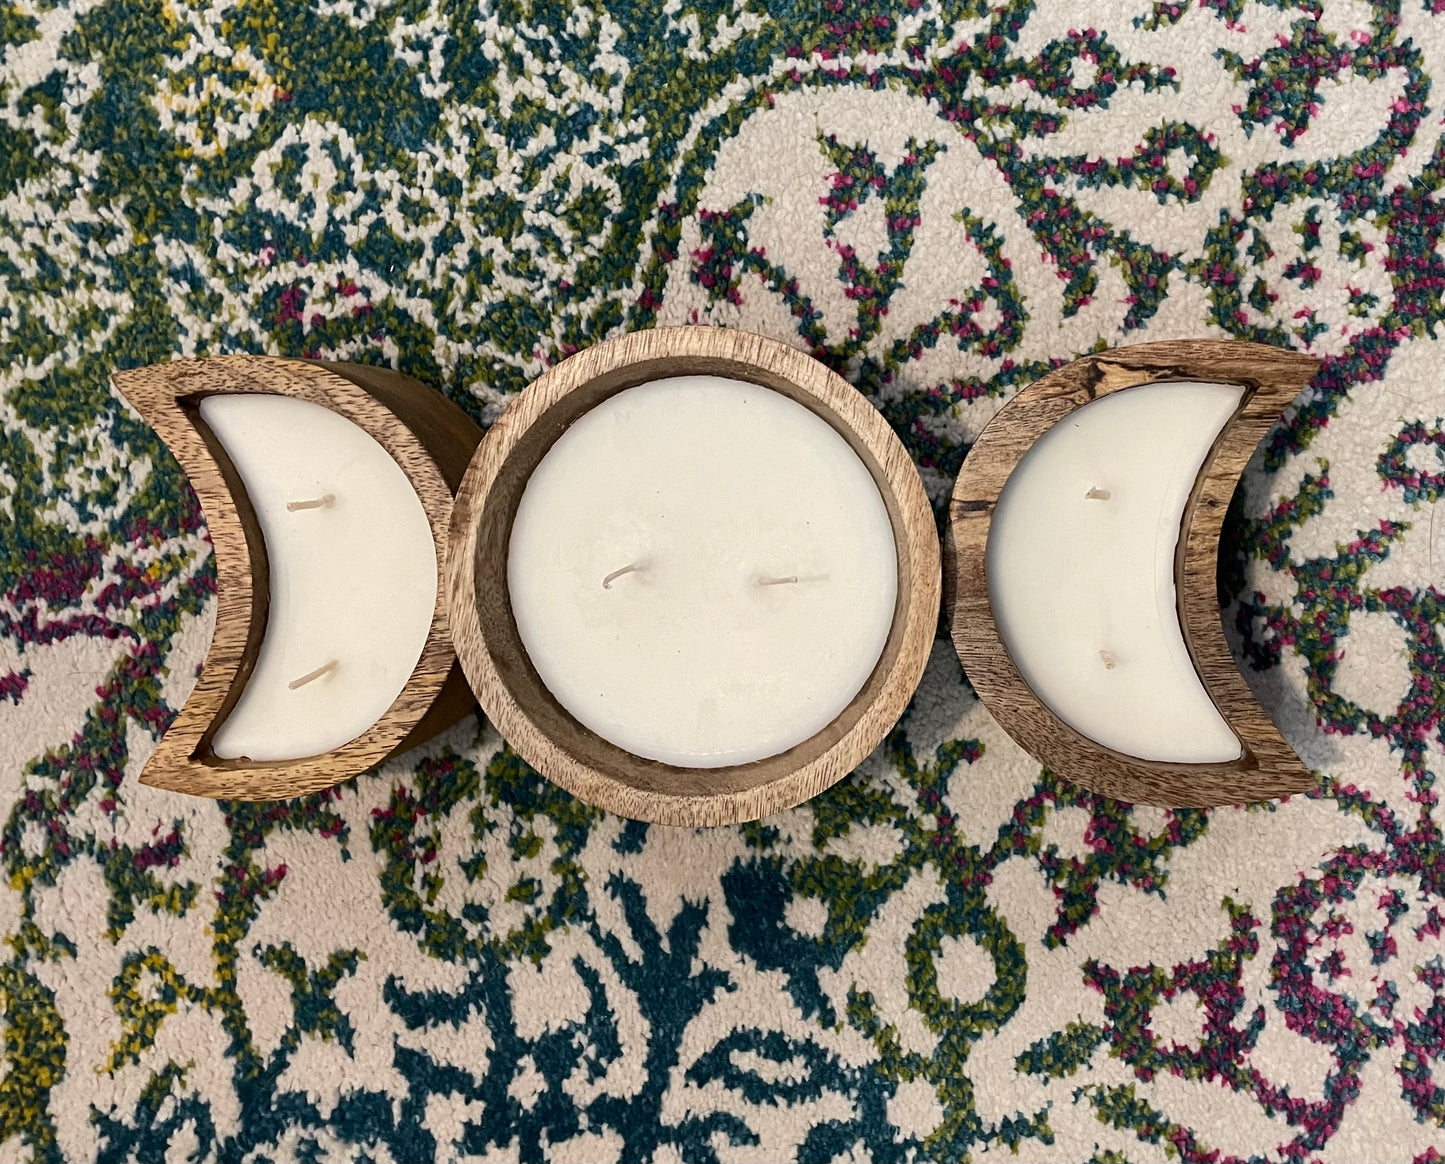 Moon Maidens Candle Collection - Full Moon - Vanilla - lead=free double wick